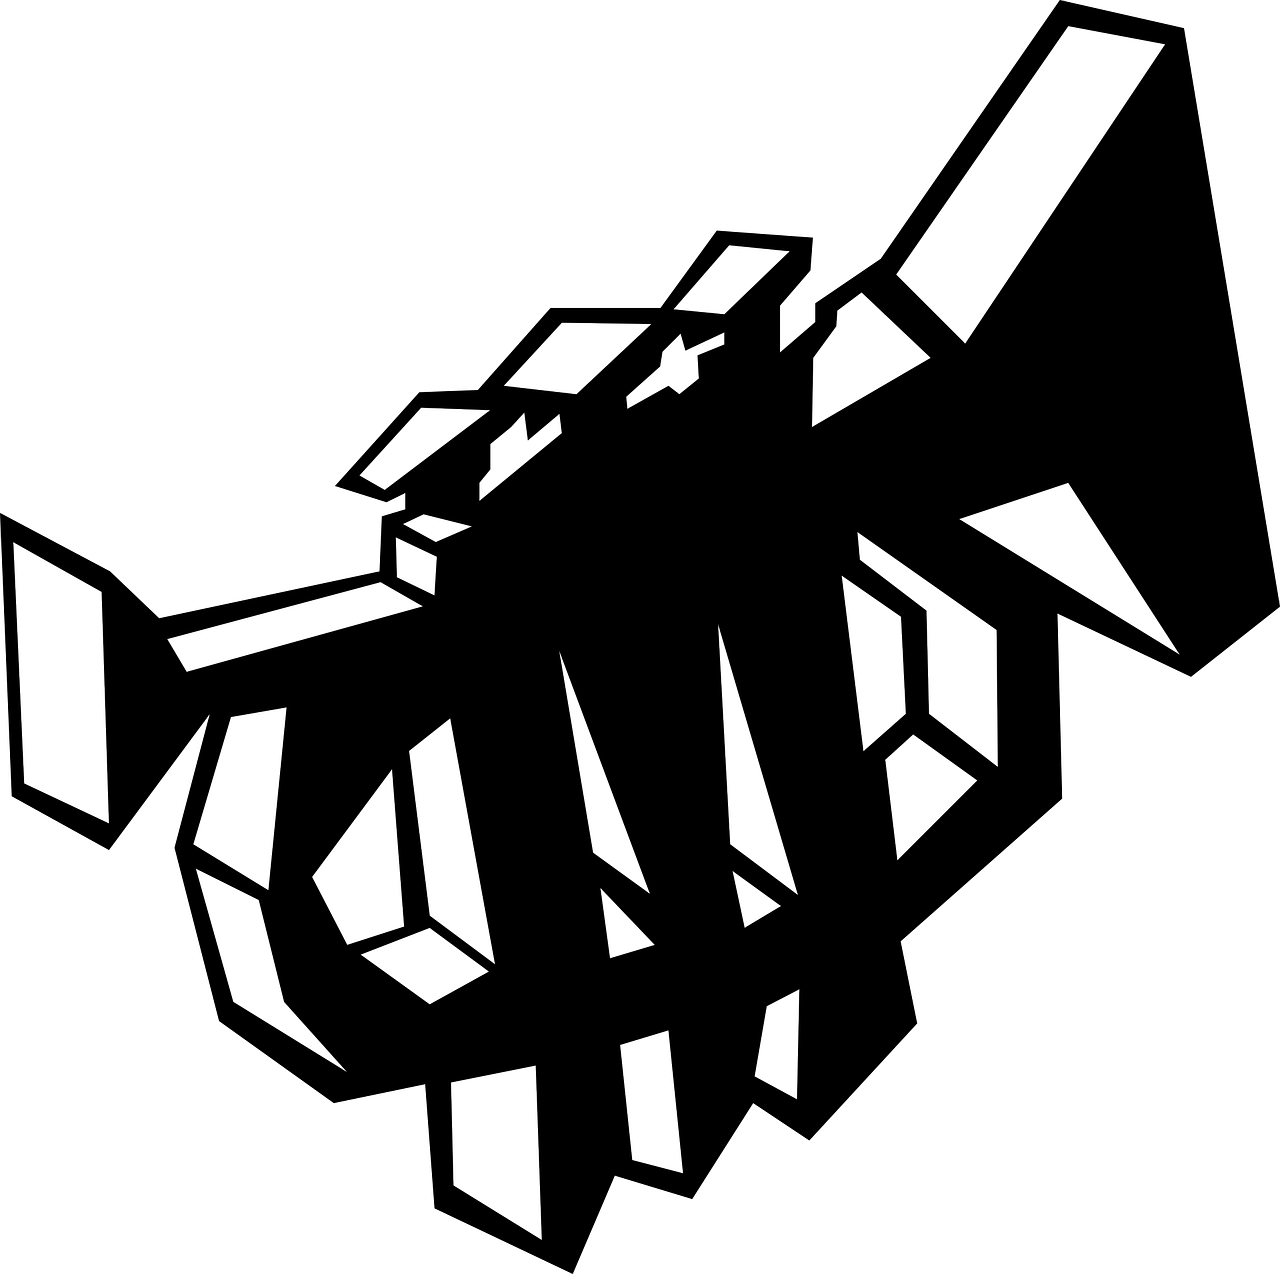 a black and white image of a broken window, vector art, inspired by Josef Čapek, deviantart, crystal cubism, space insect android, arms extended, logo without text, space station